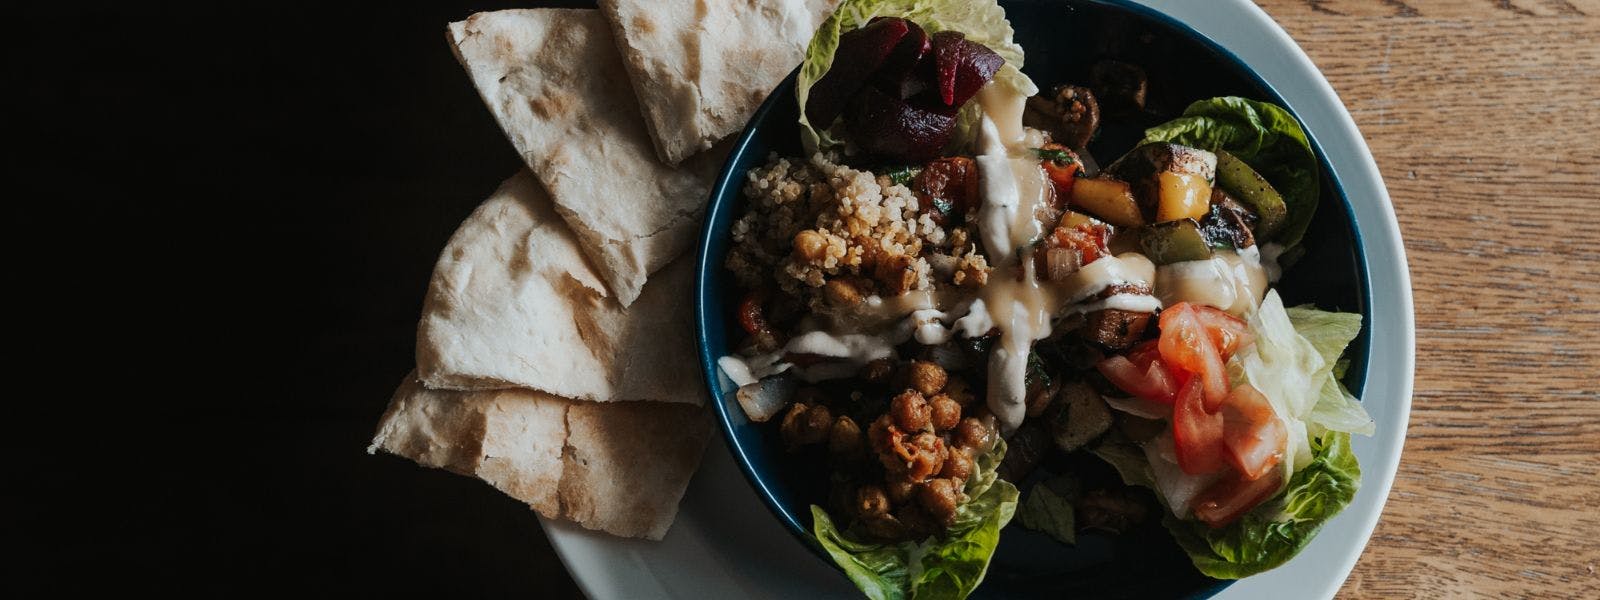 A plate of food with a fresh salad and pita bread, a delicious and healthy meal option.